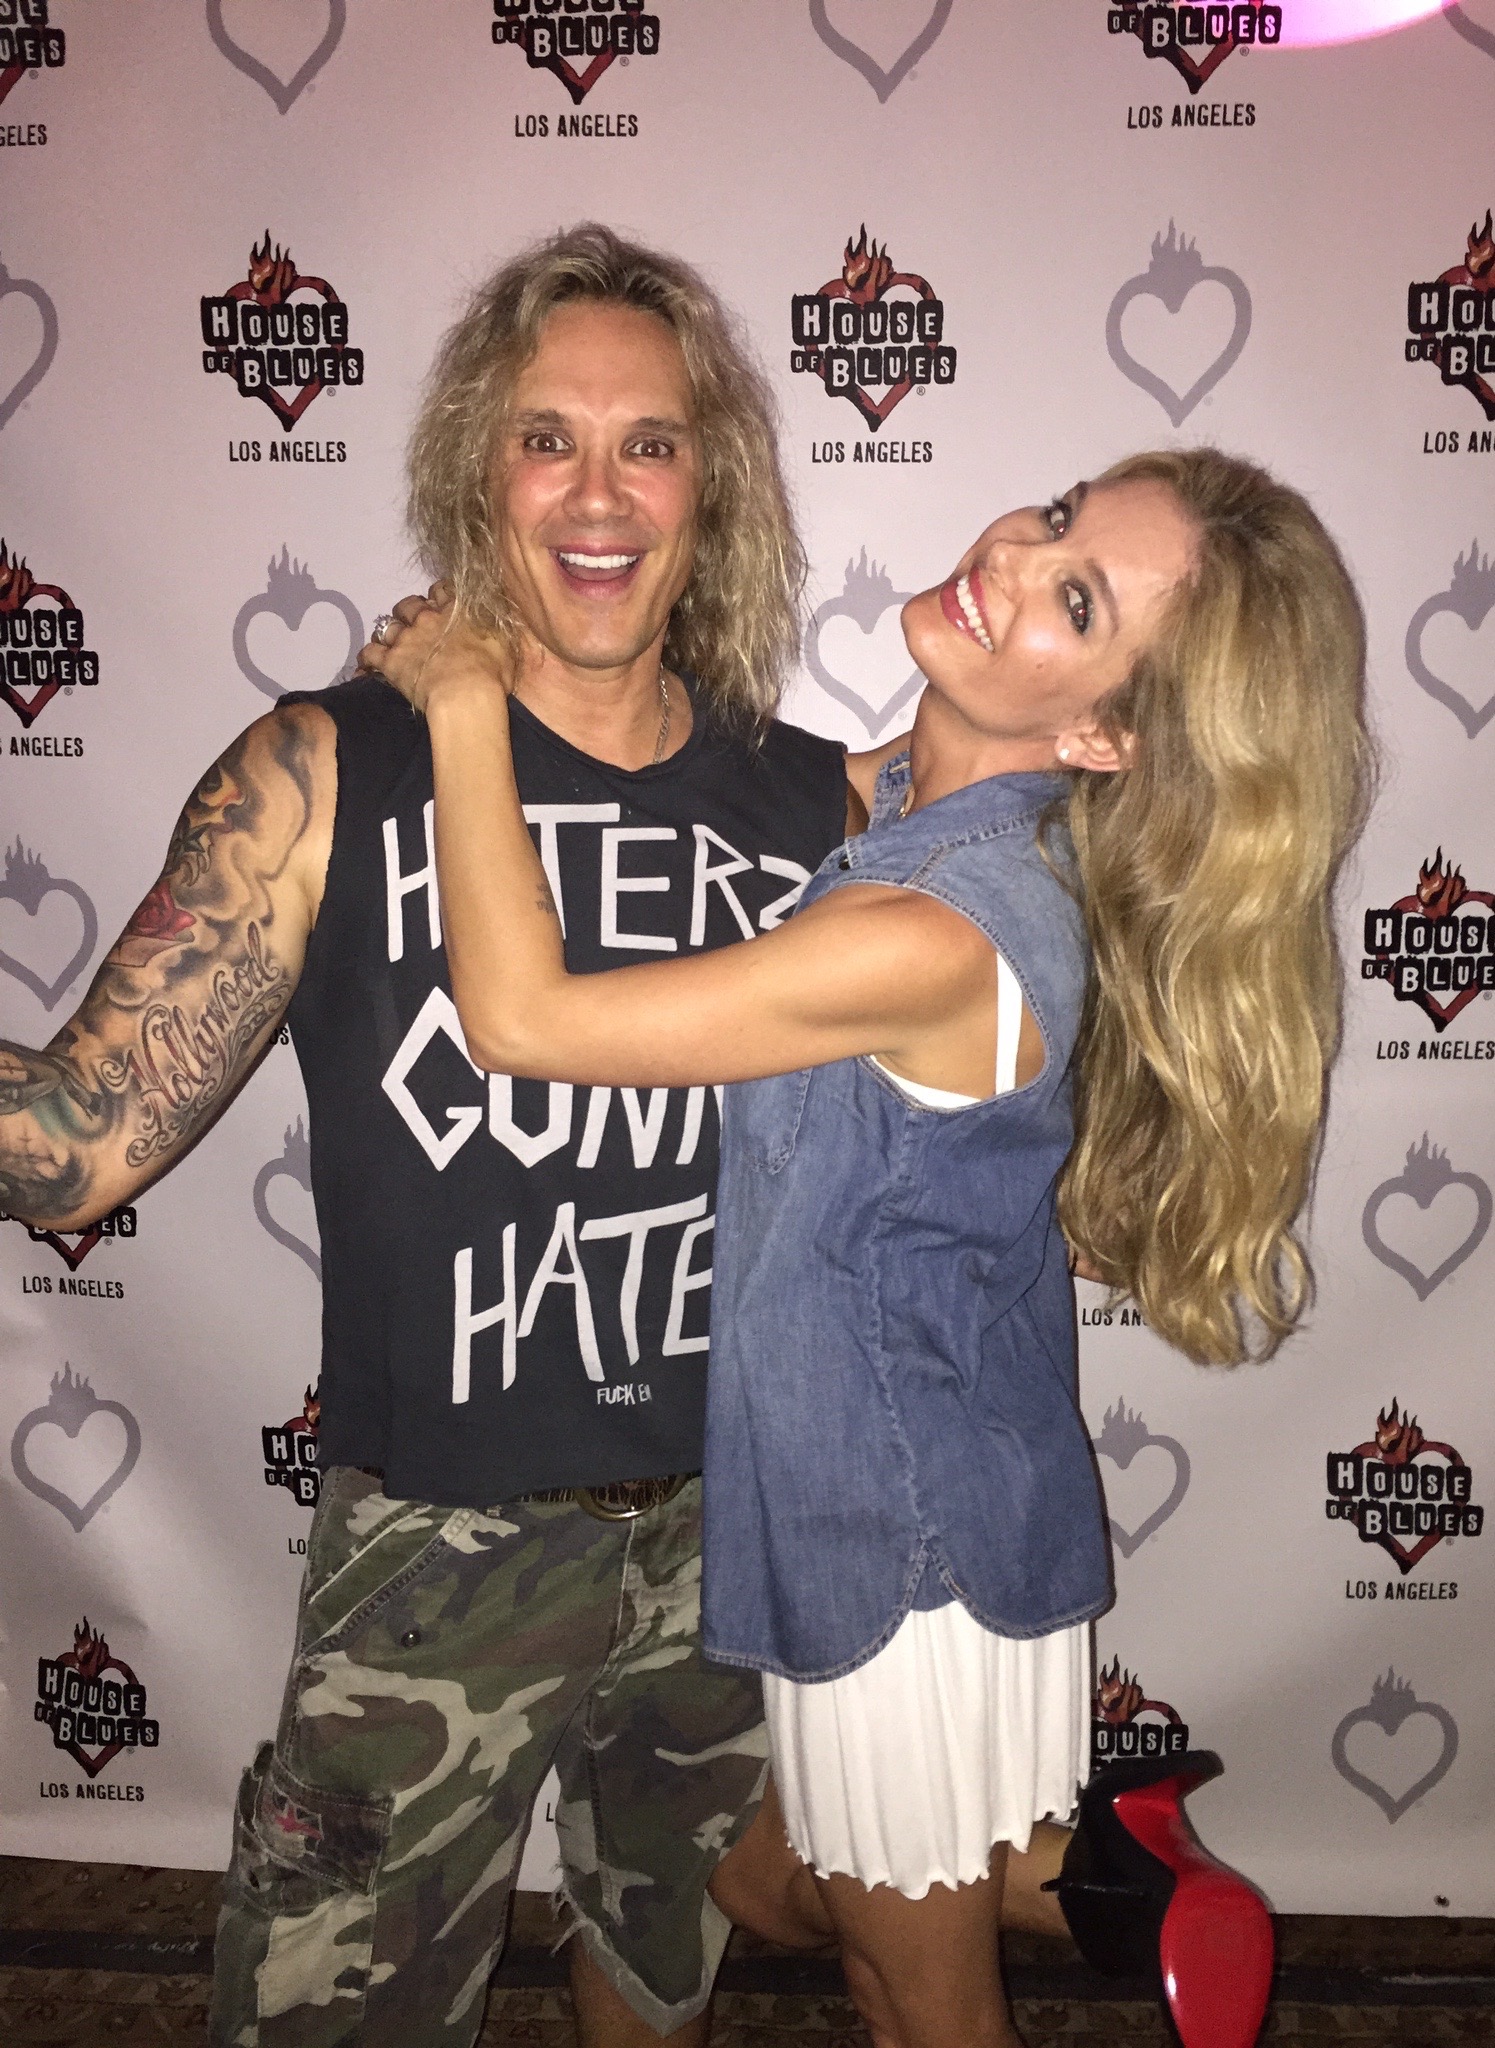 Jocelyn Saenz and Ralph Saenz (AKA Michael Starr from the band Steel Panther) attend the closing night of the historic Sunset Boulevard House Of Blues in Hollywood, CA.